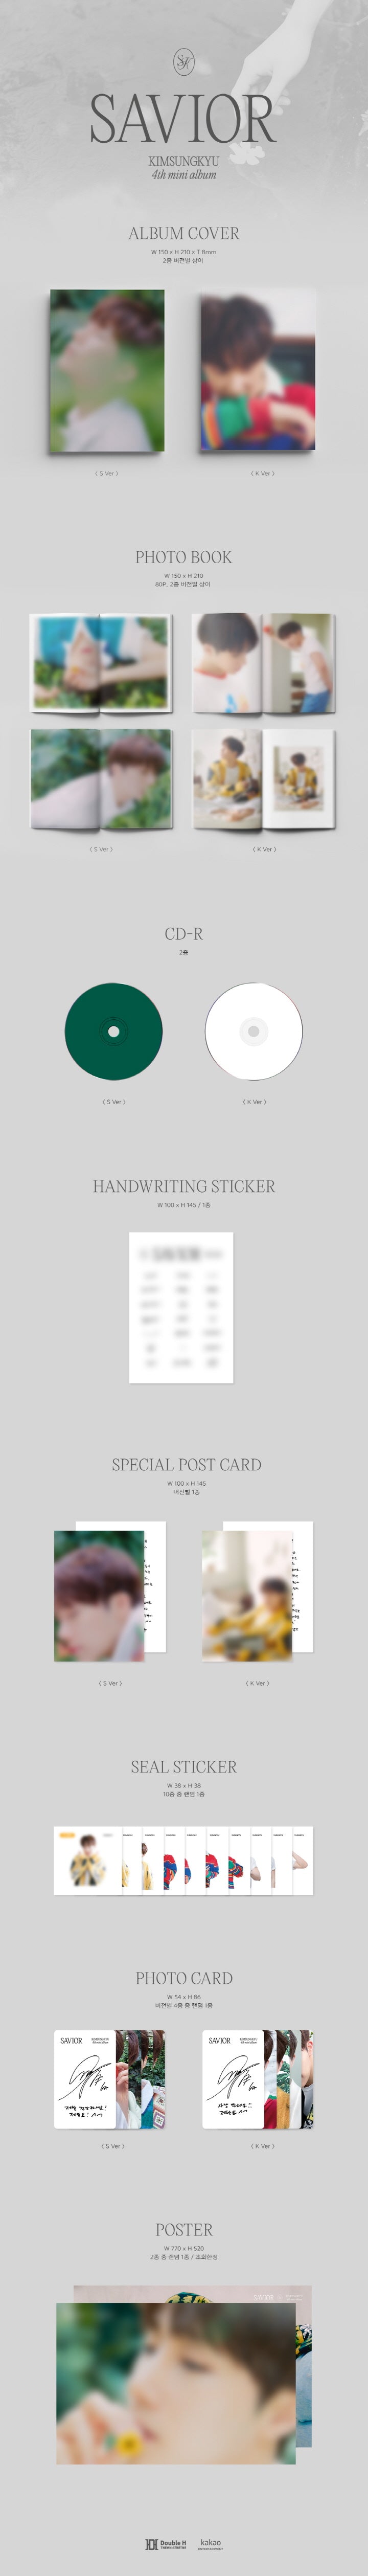 1 CD
1 Photo Book (80 pages)
1 Handwriting Sticker
1 Special Postcard
1 Seal Sticker
1 Photo Card (random out of 4 types)